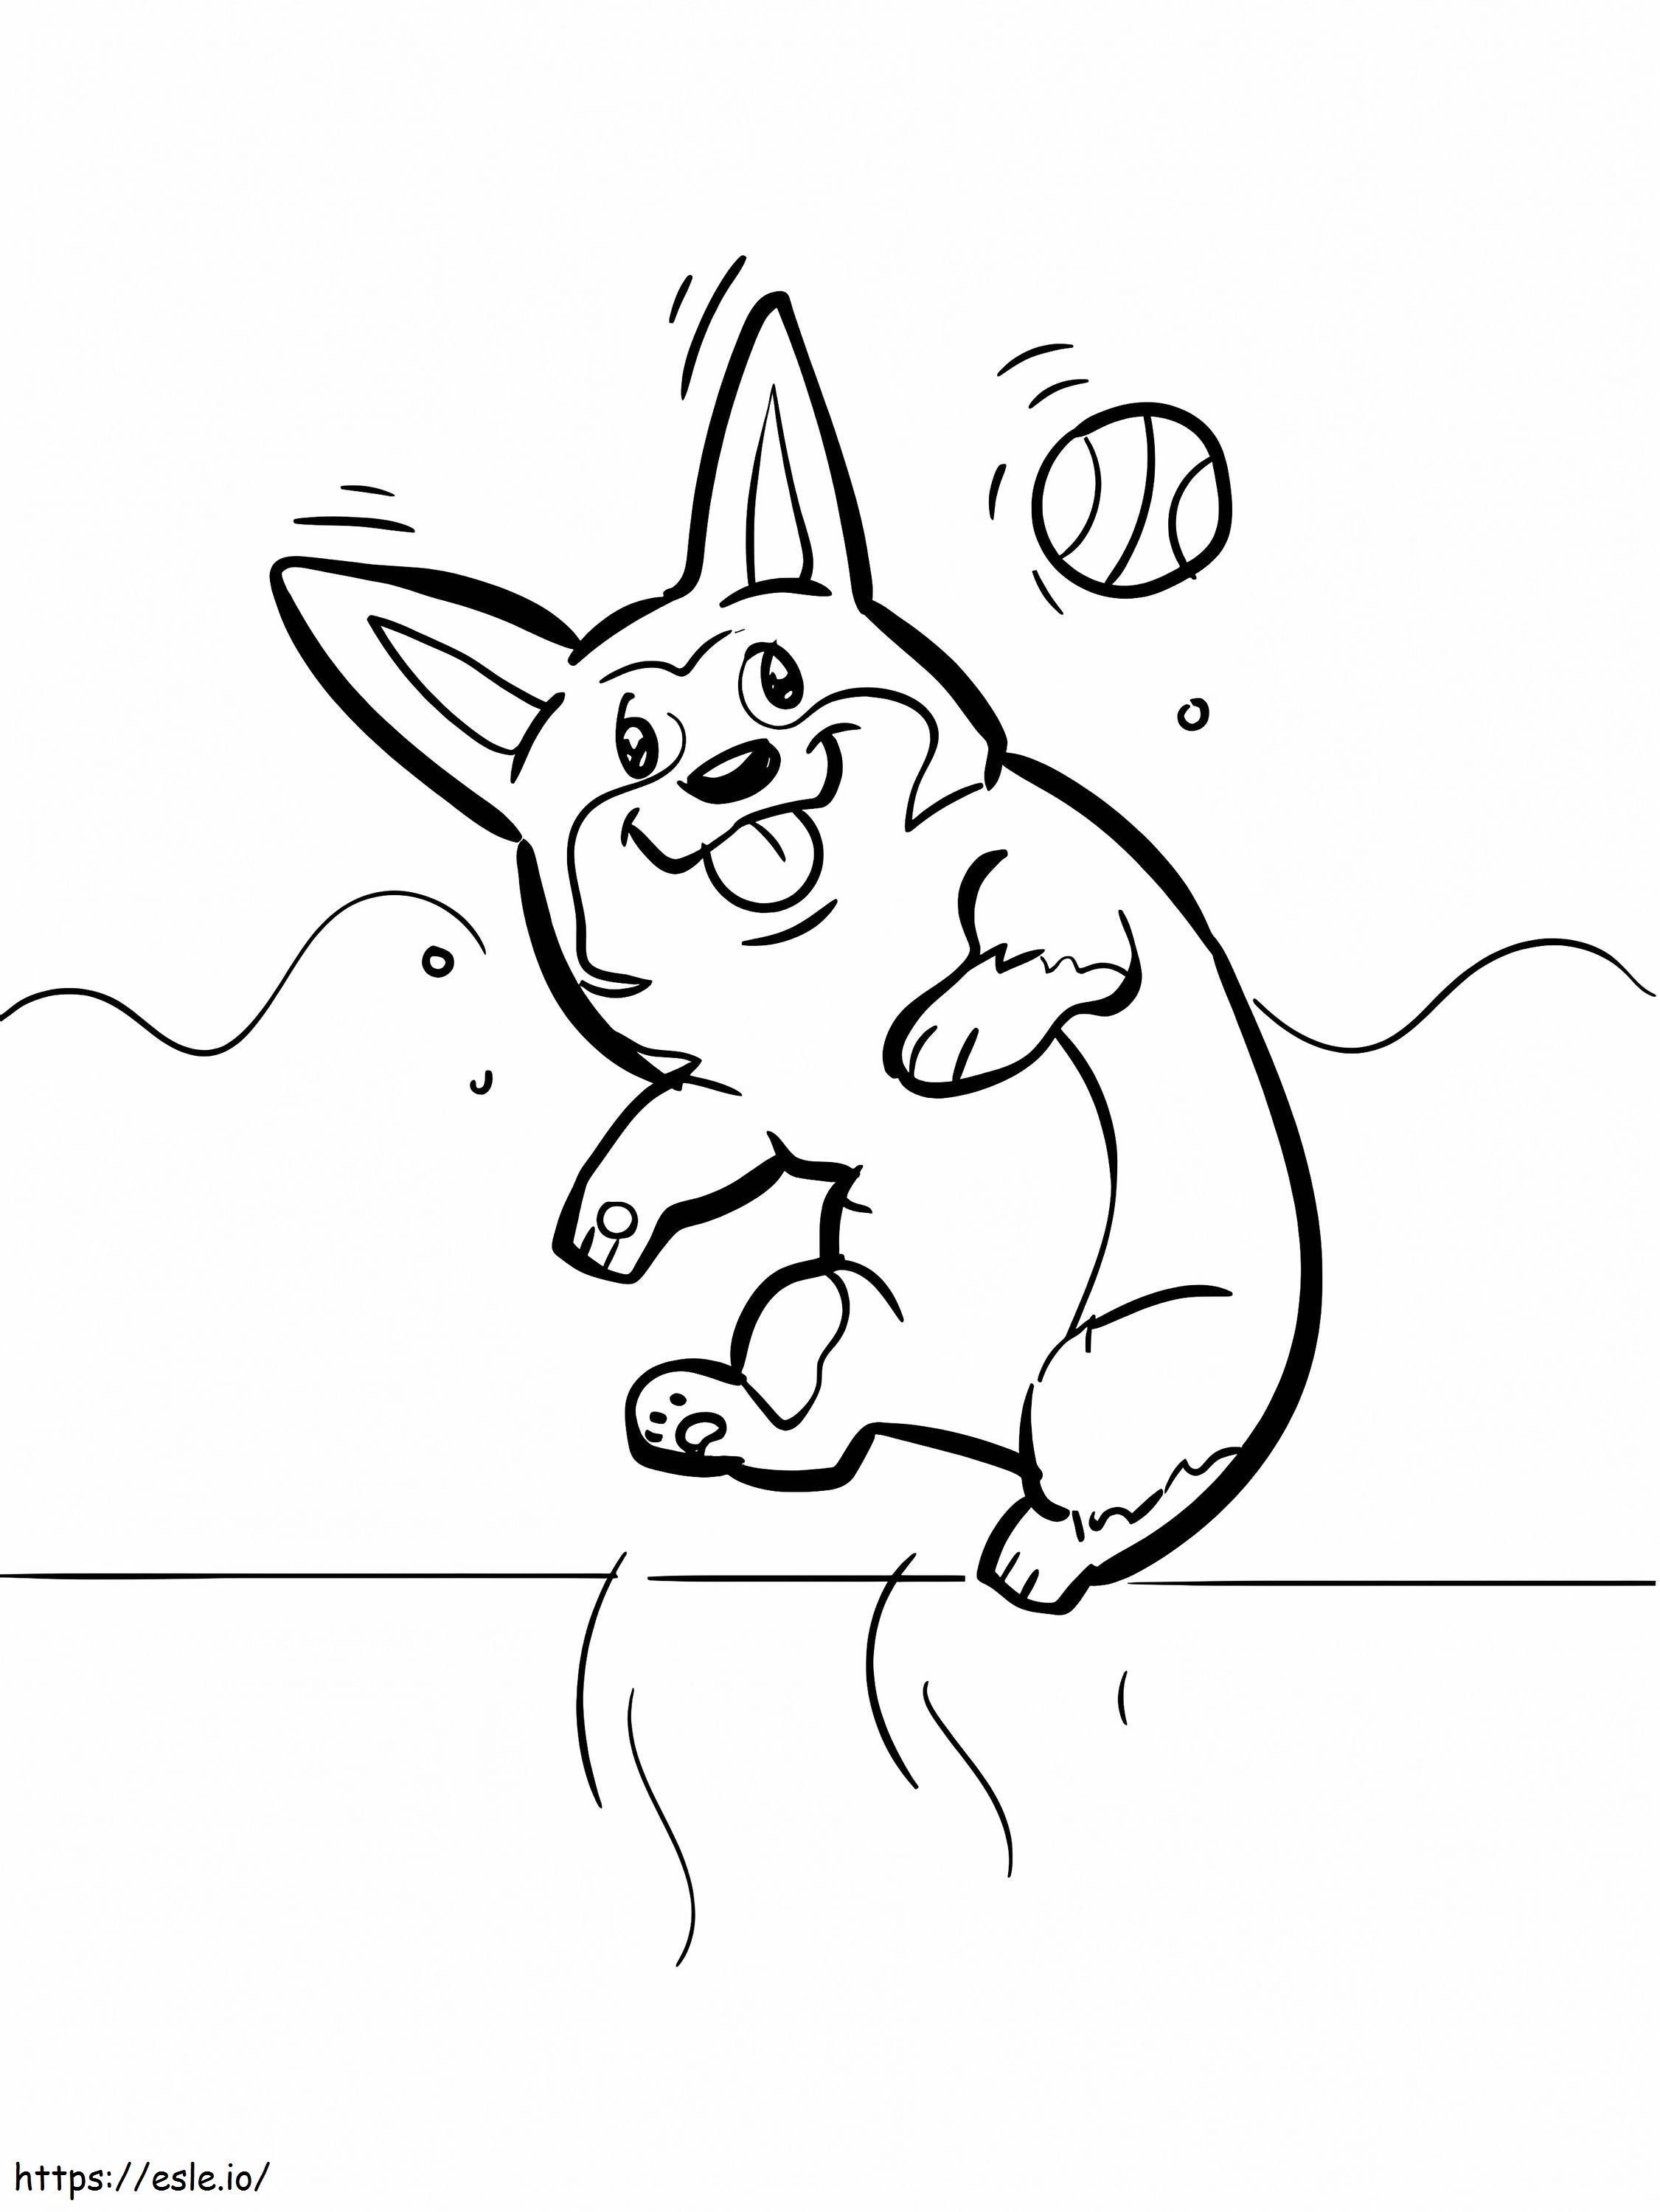 Cute Corgi With A Ball coloring page